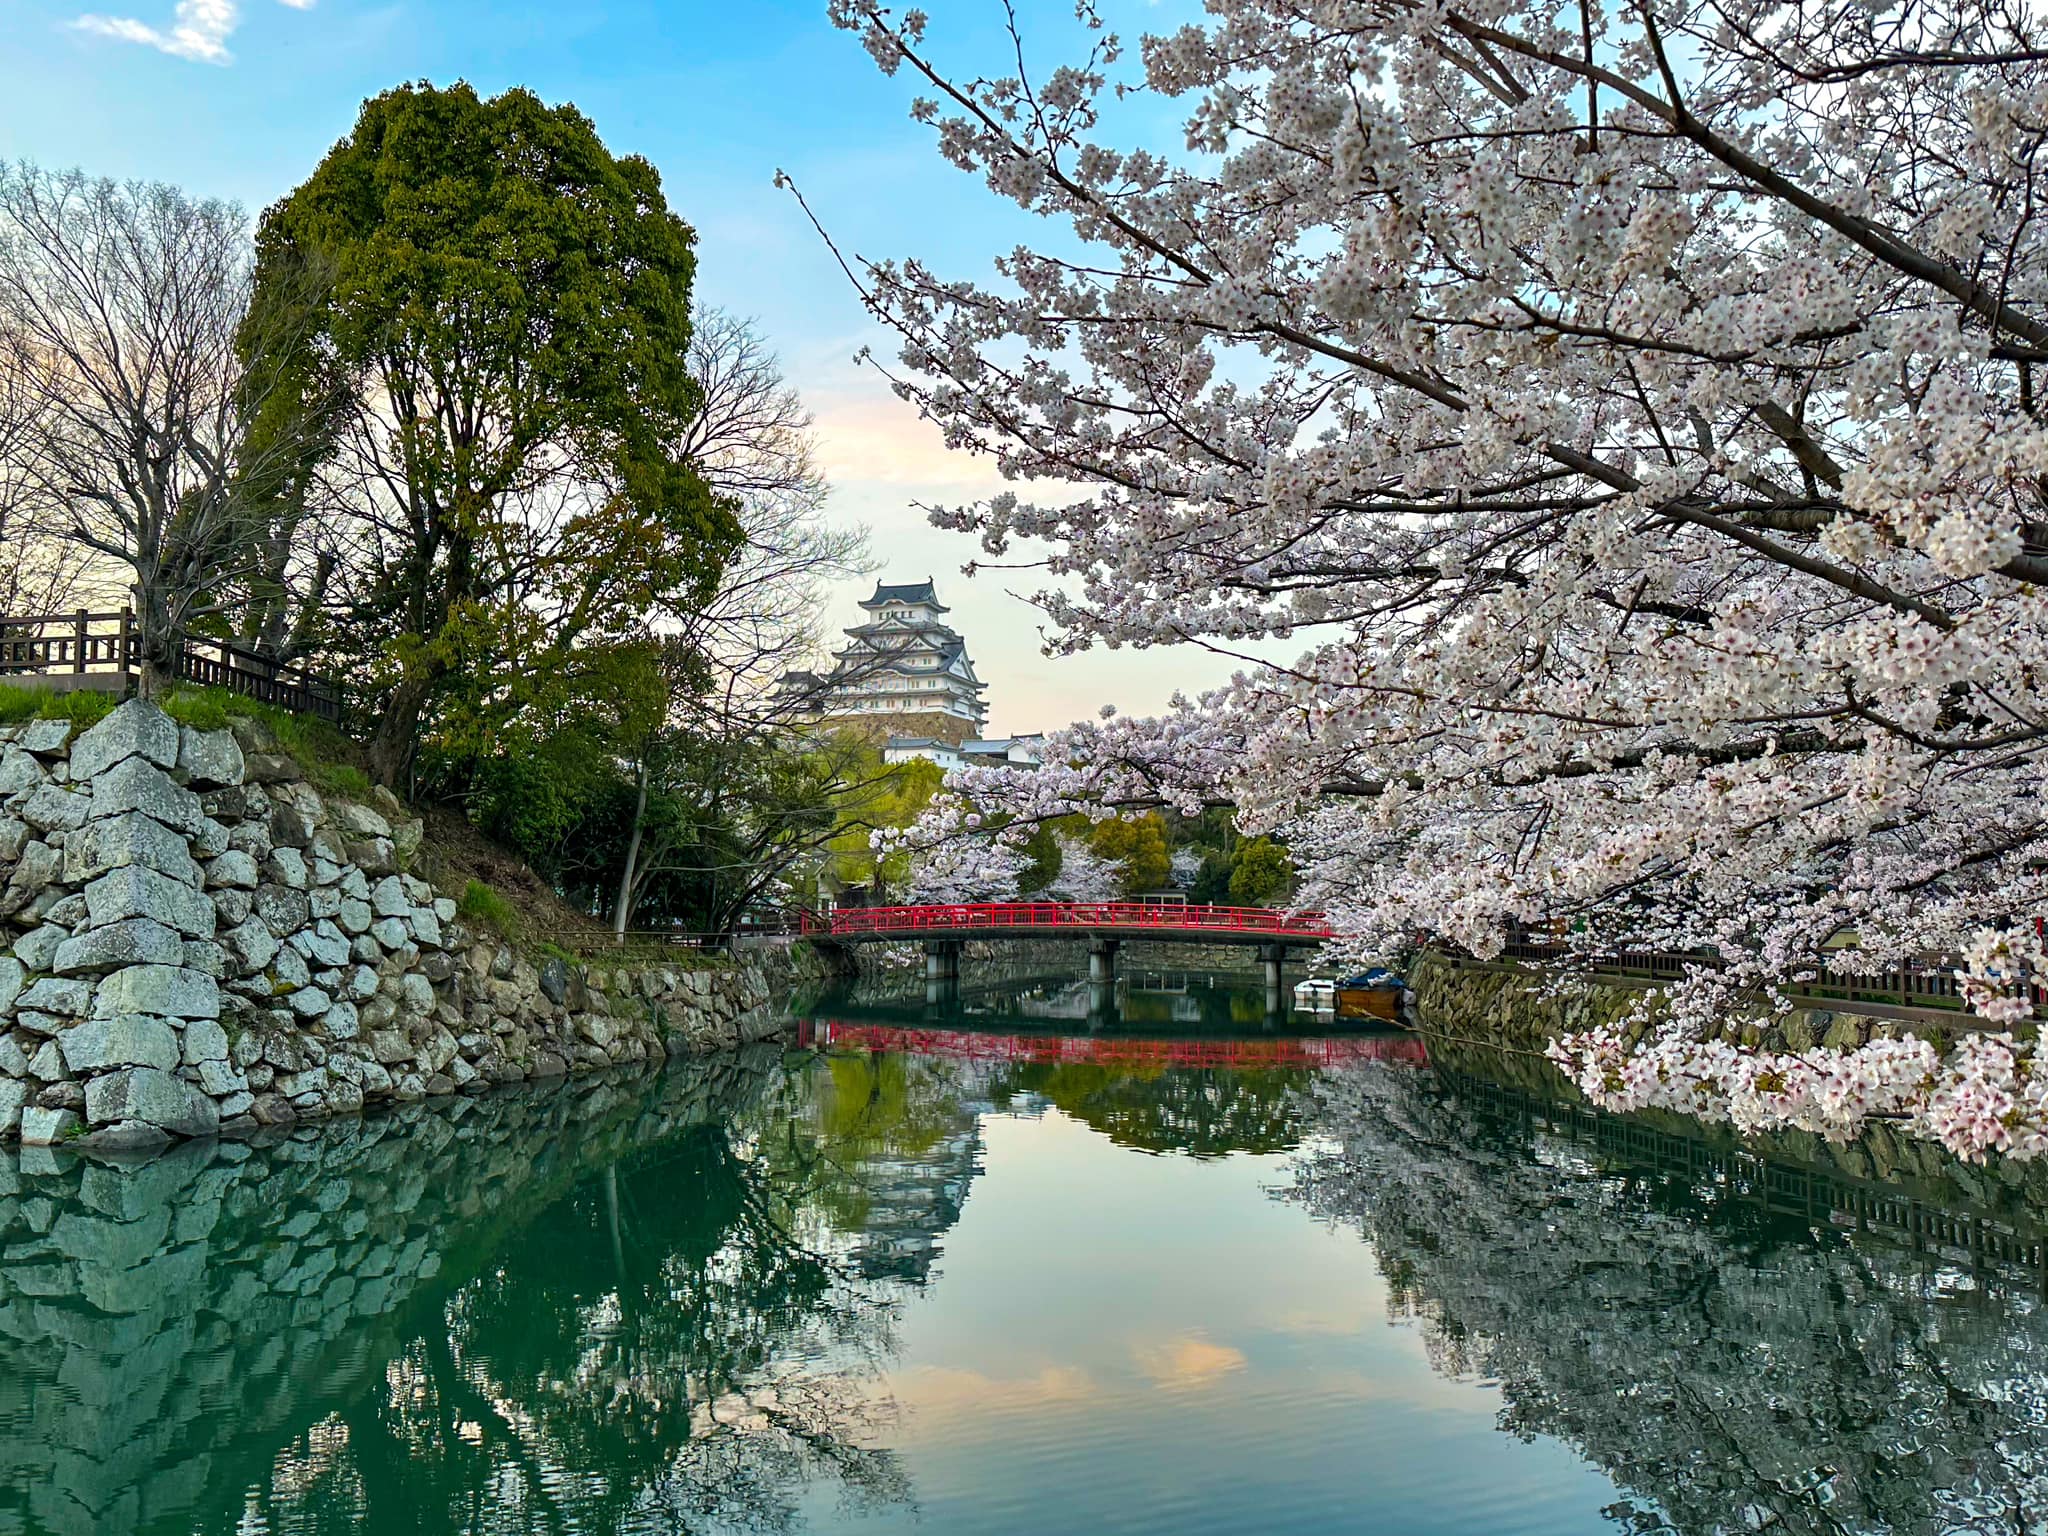 Hiroshima to Himeji – Best Spot for Cherry Blossoms!